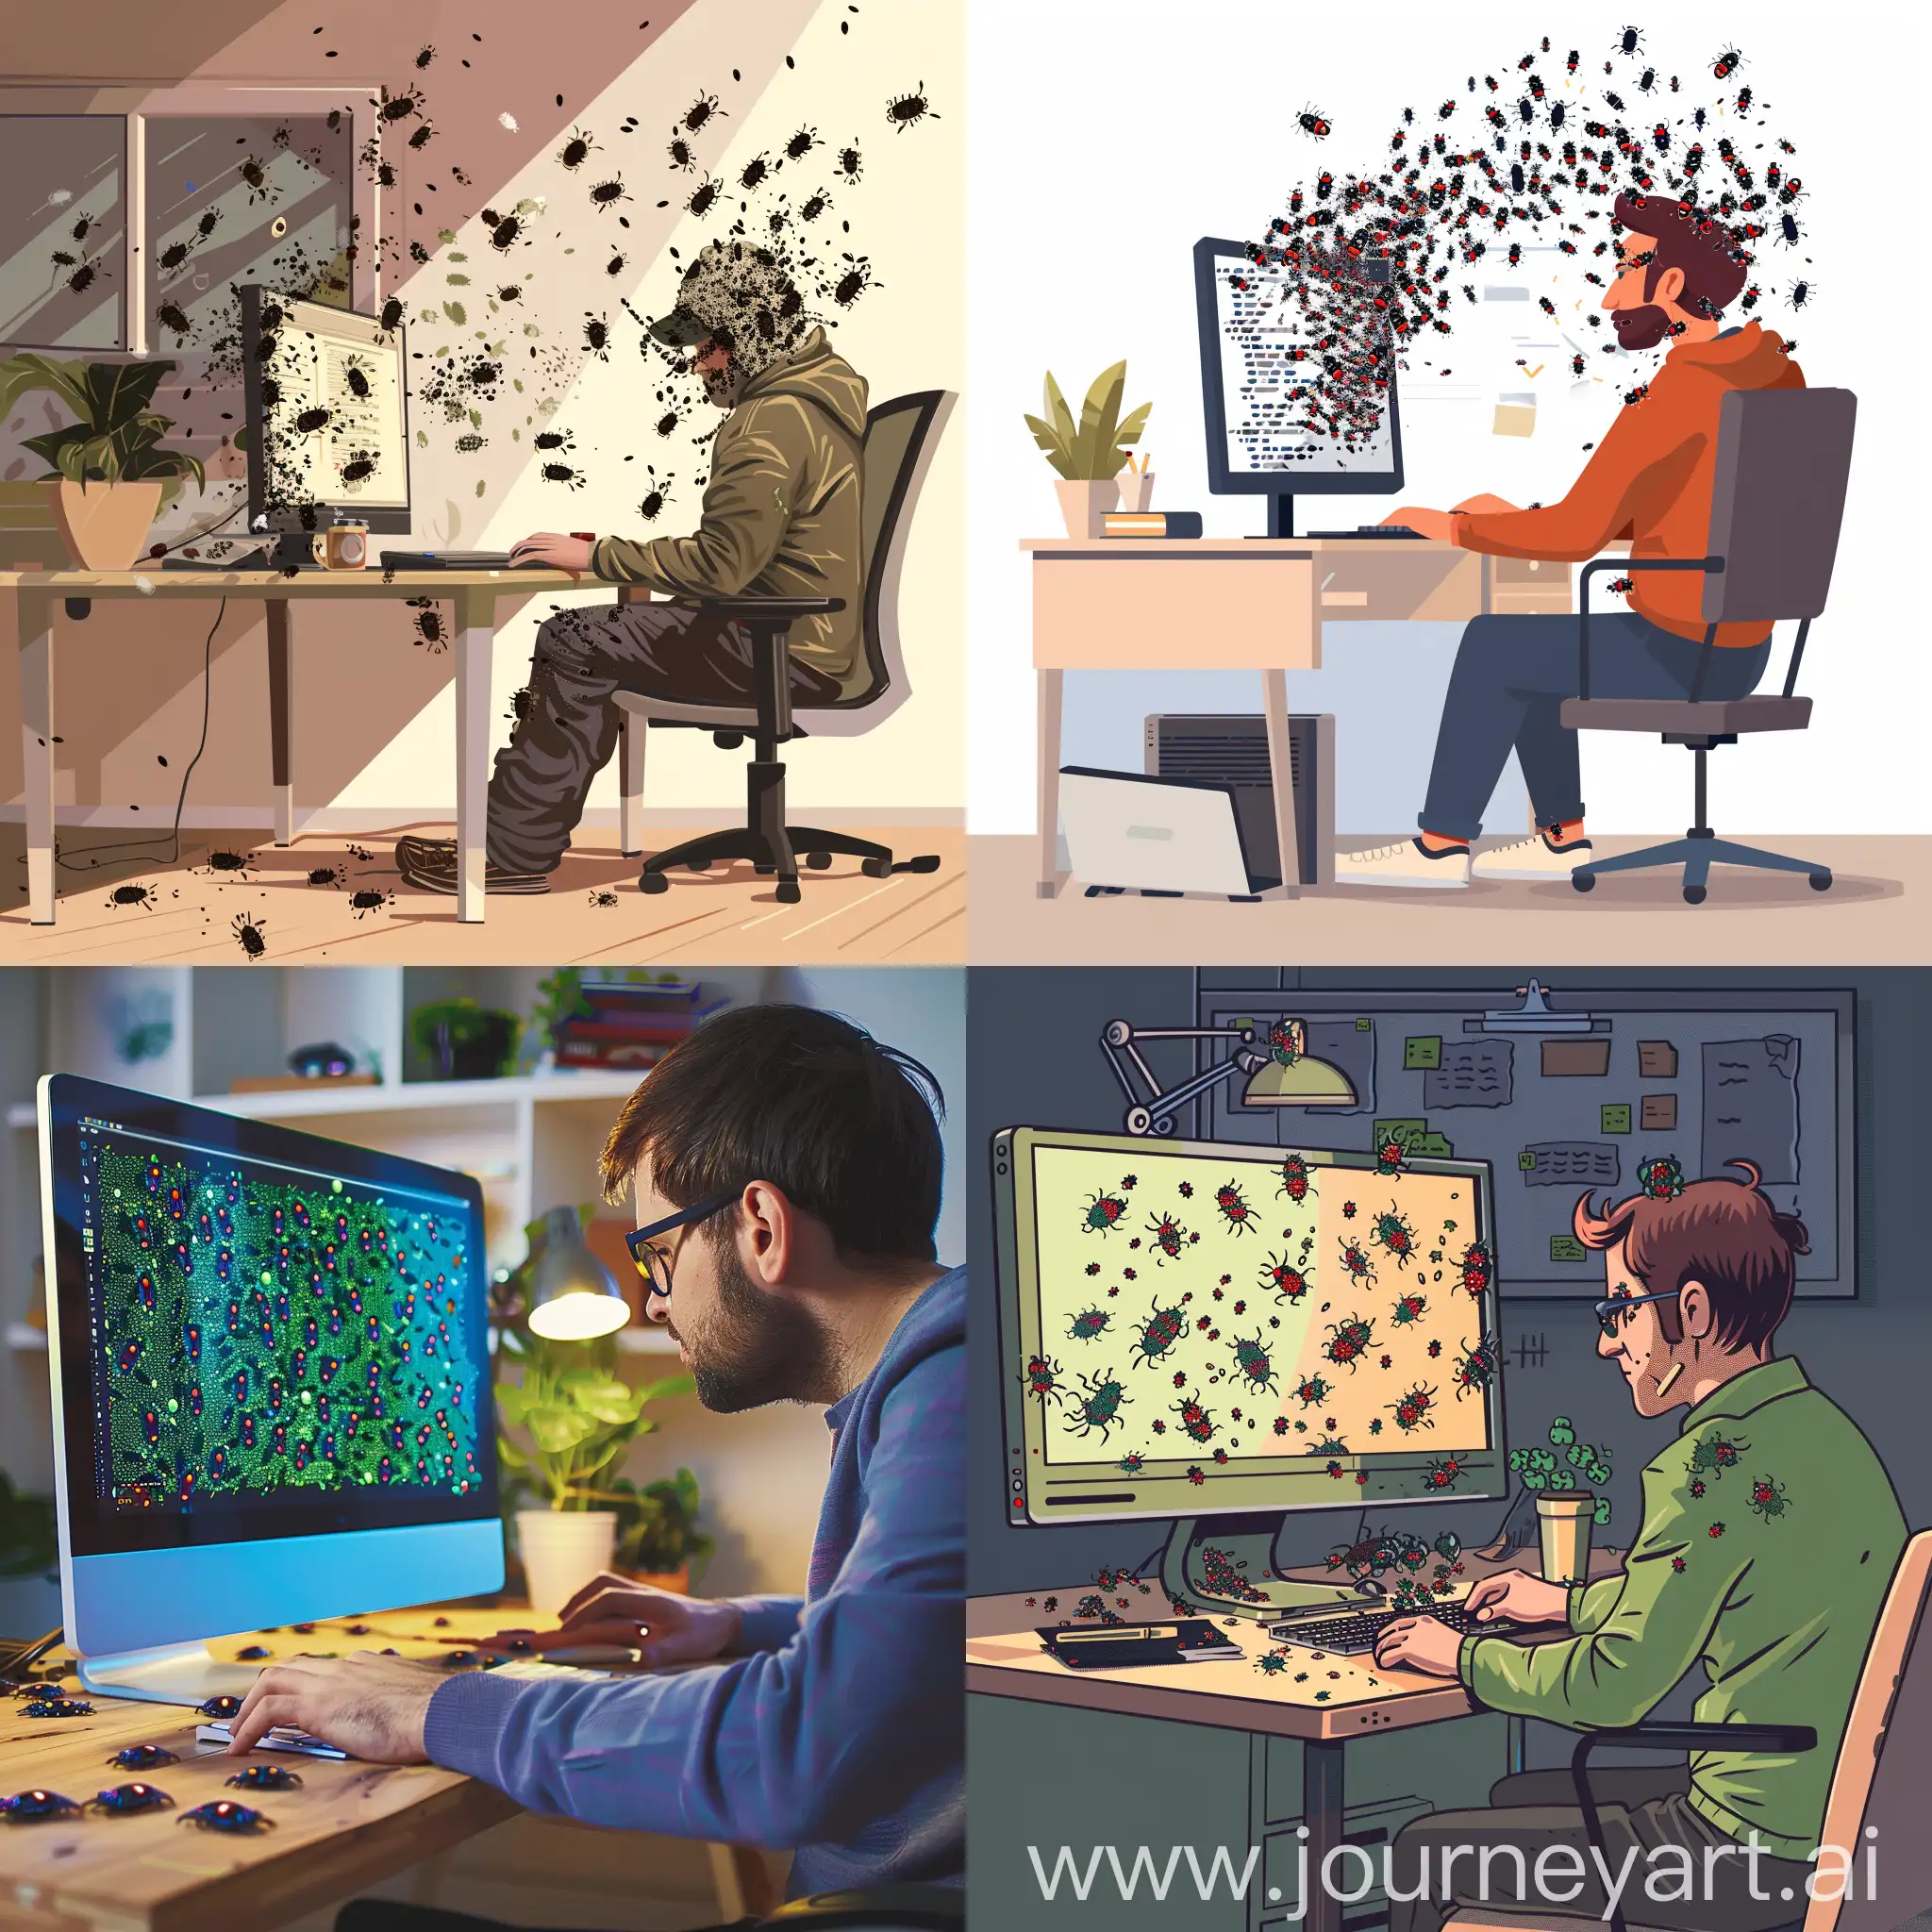 A programmer sitting at a desk with a computer covered in bugs